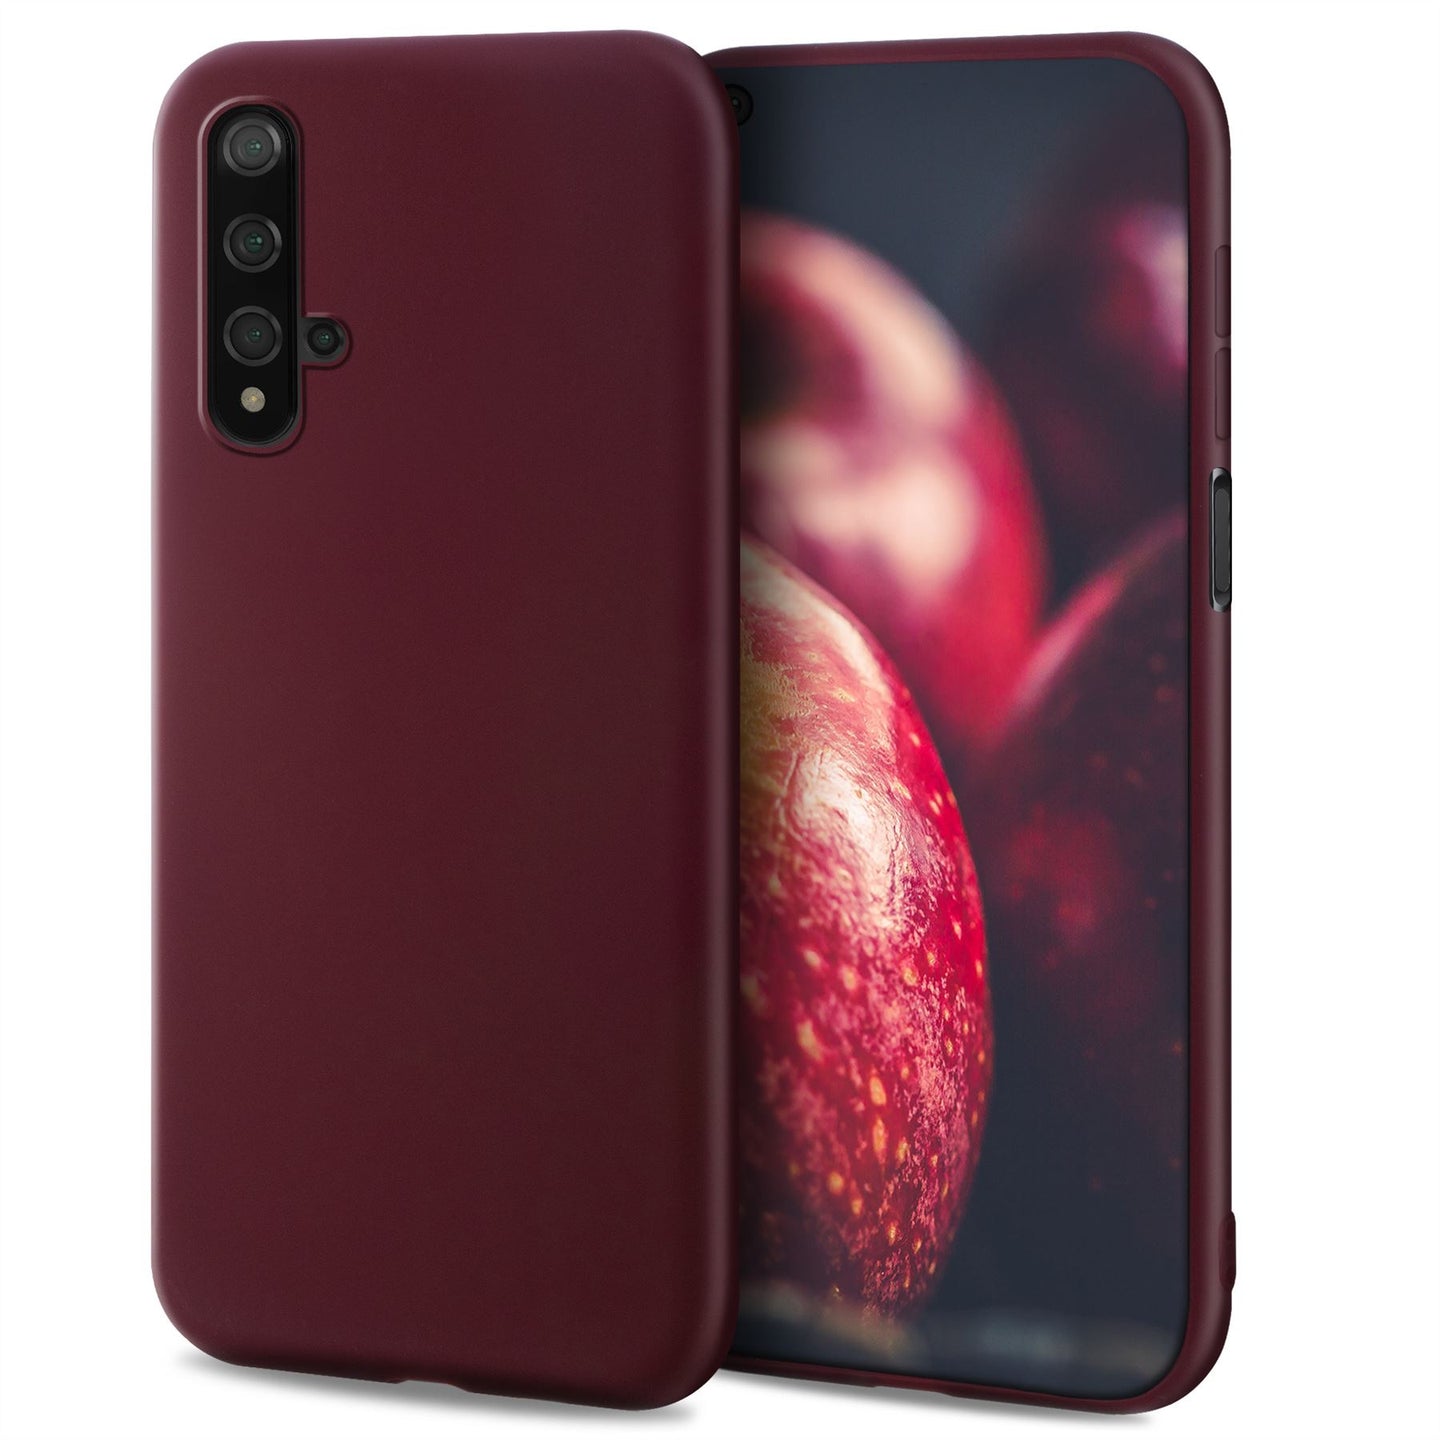 Moozy Minimalist Series Silicone Case for Huawei Nova 5T and Honor 20, Wine Red - Matte Finish Slim Soft TPU Cover